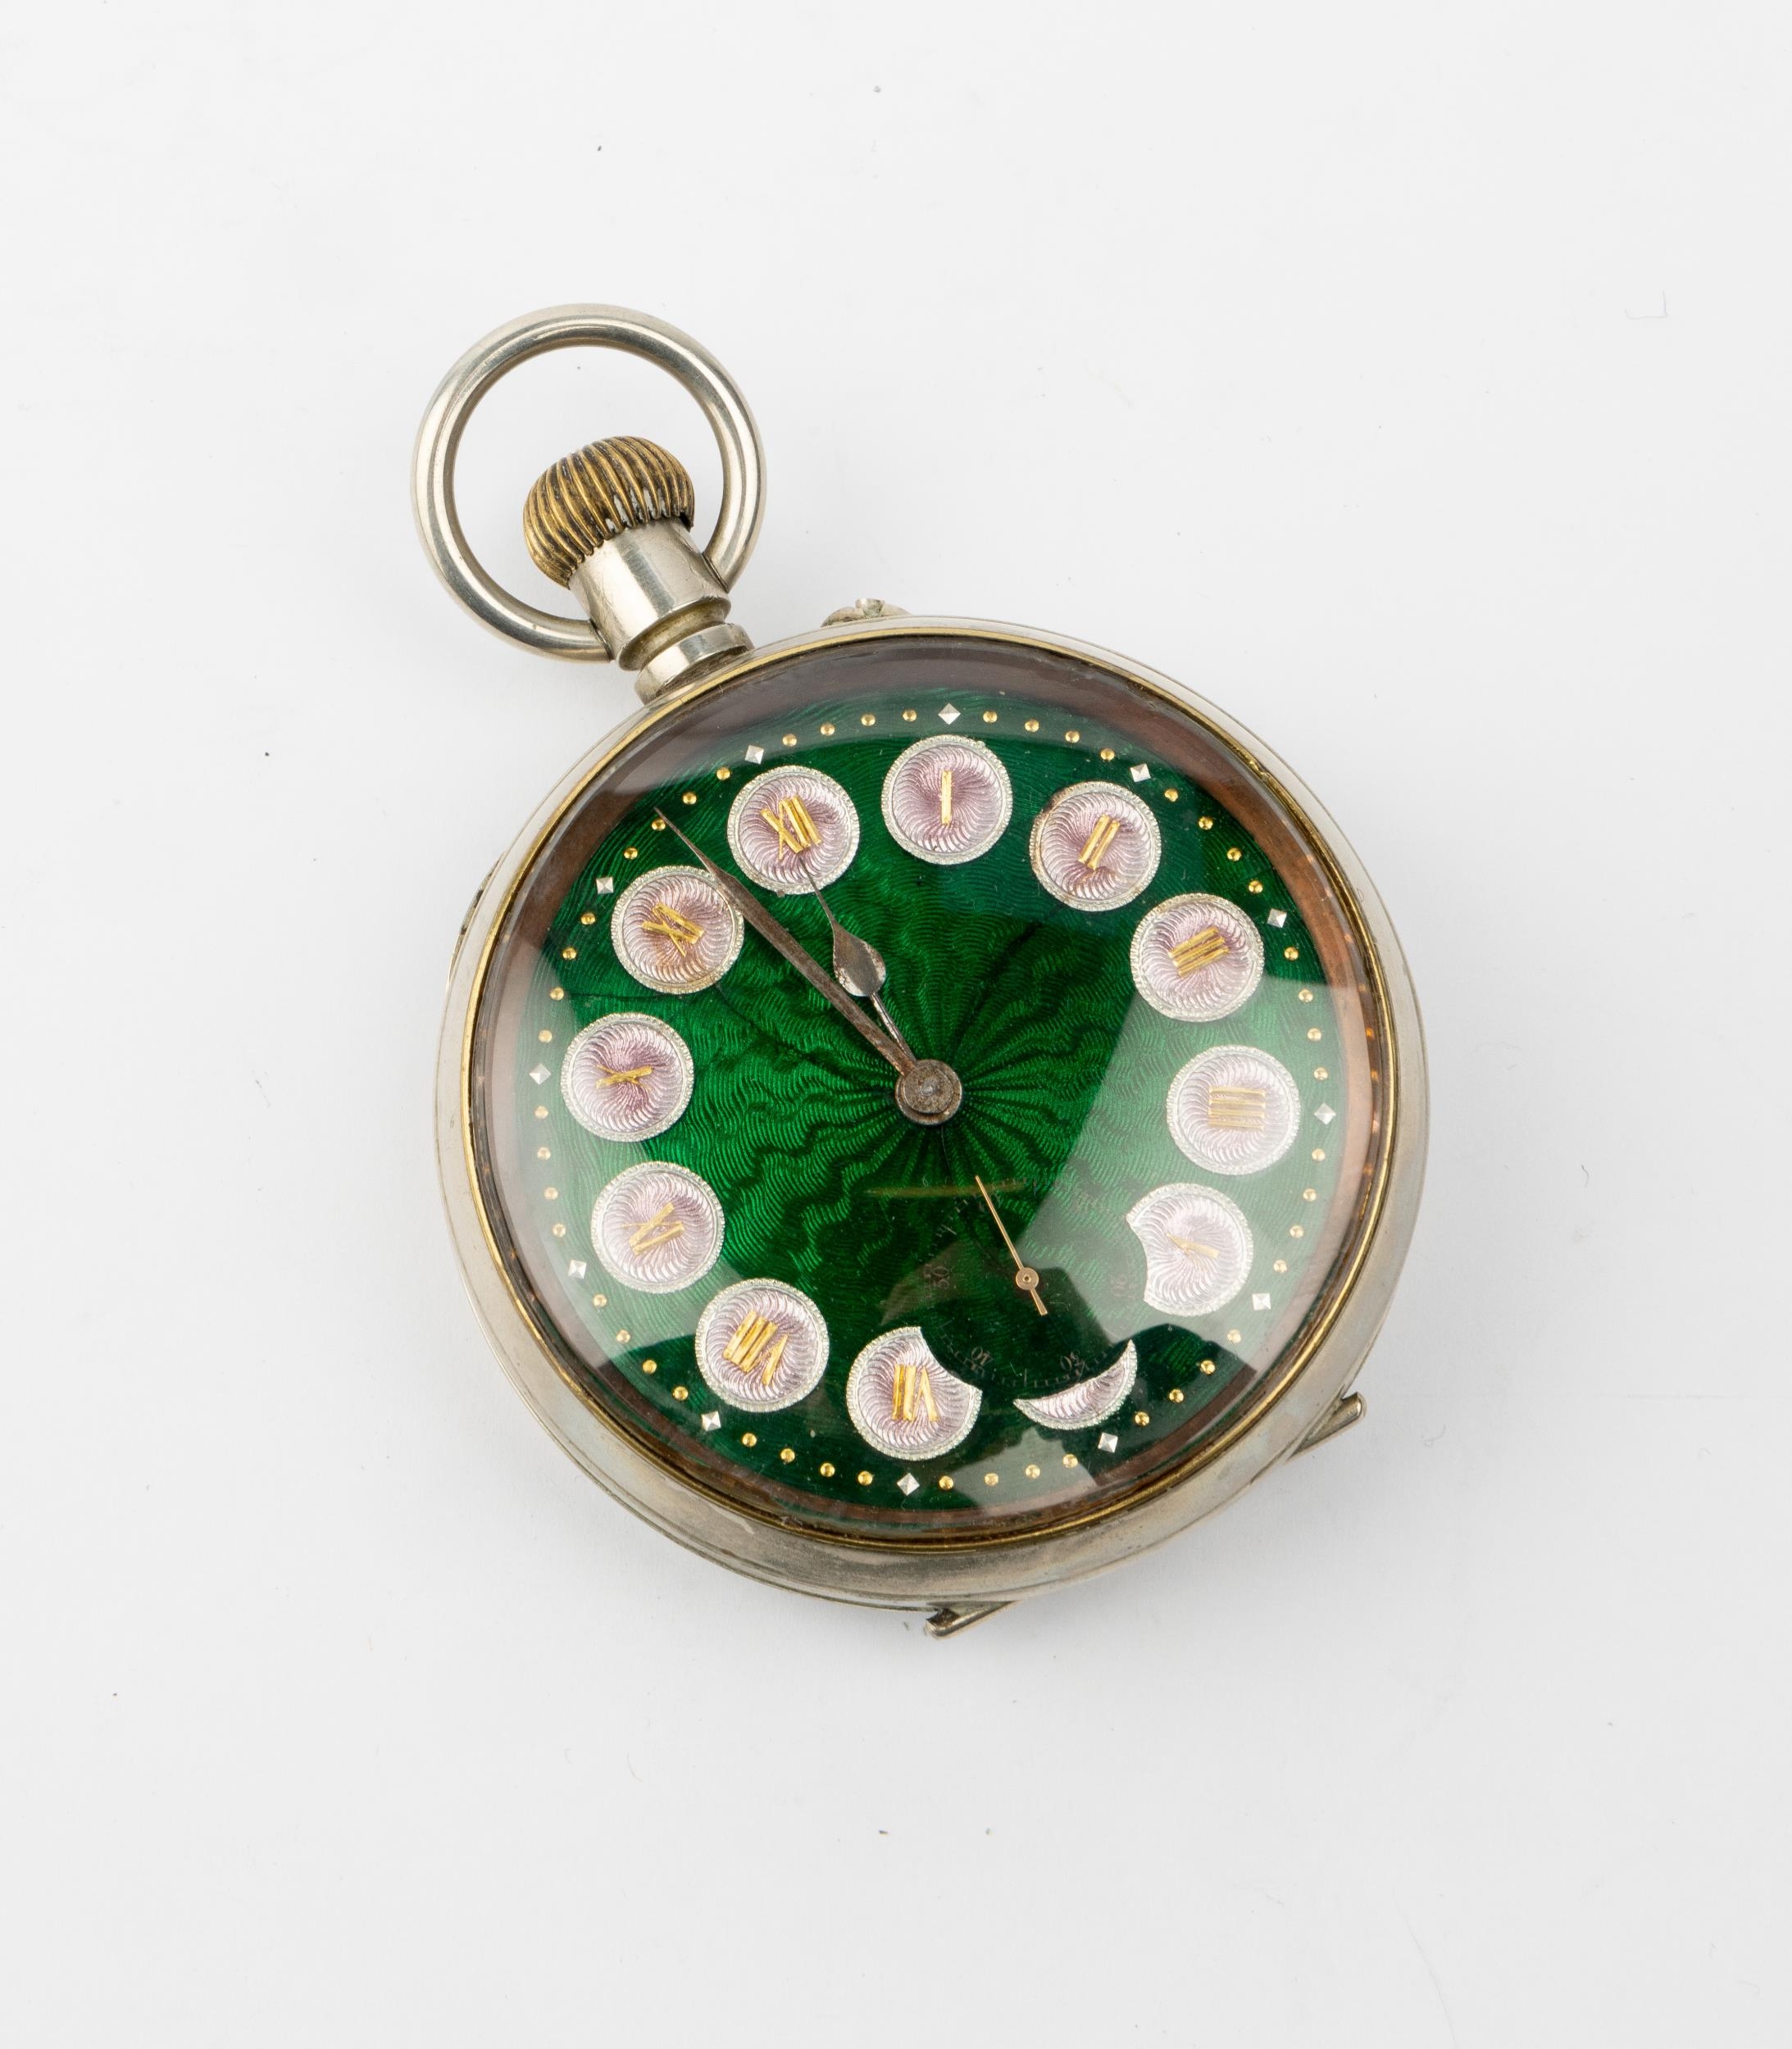 A NICKEL GOLIATH WATCH. Swiss lever escapement, green translucent enamel dial over engine turning